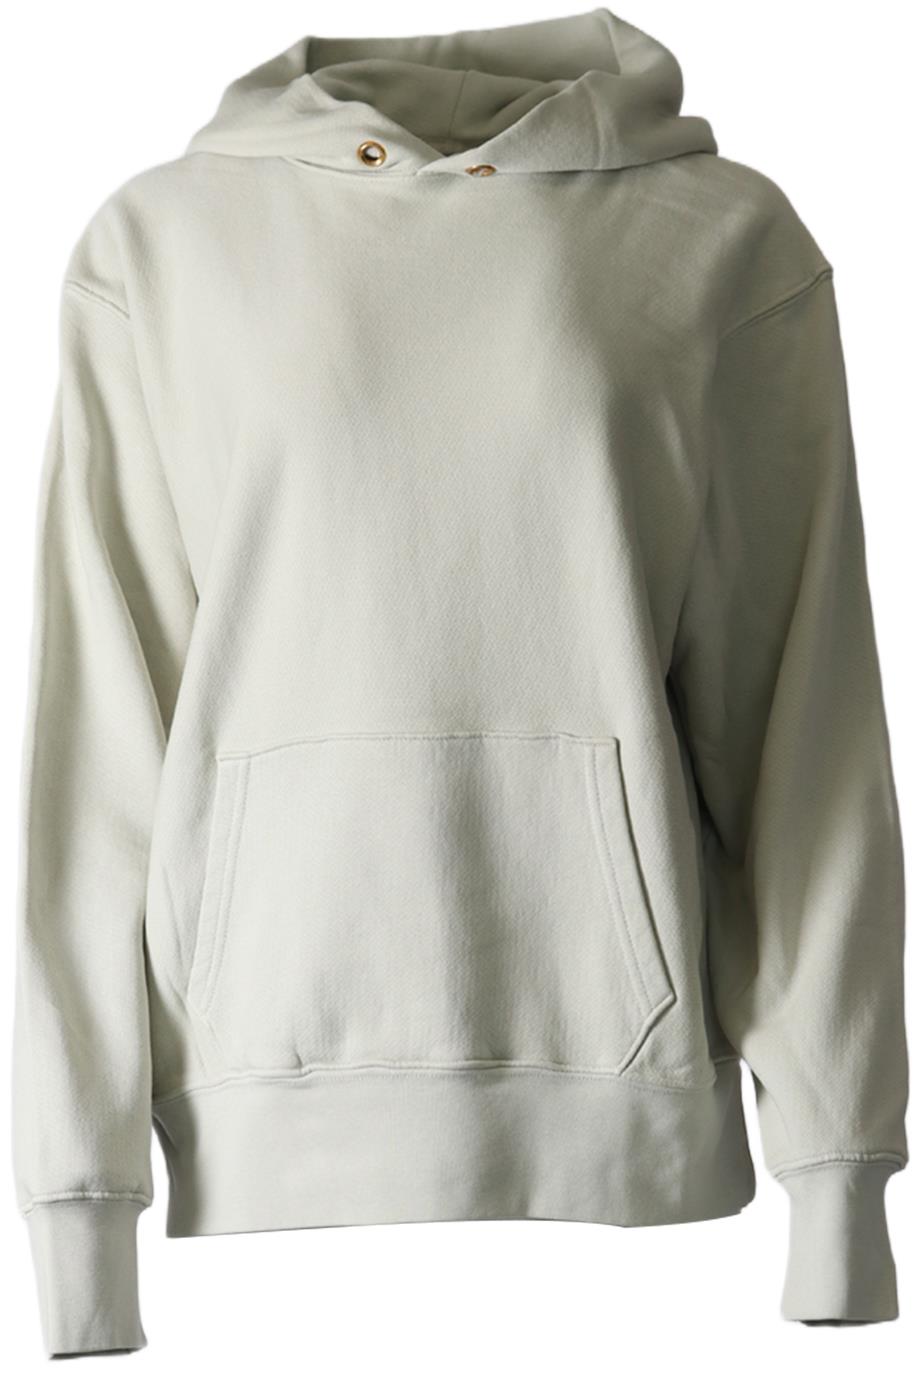 LES TIEN COTTON JERSEY HOODIE SMALL